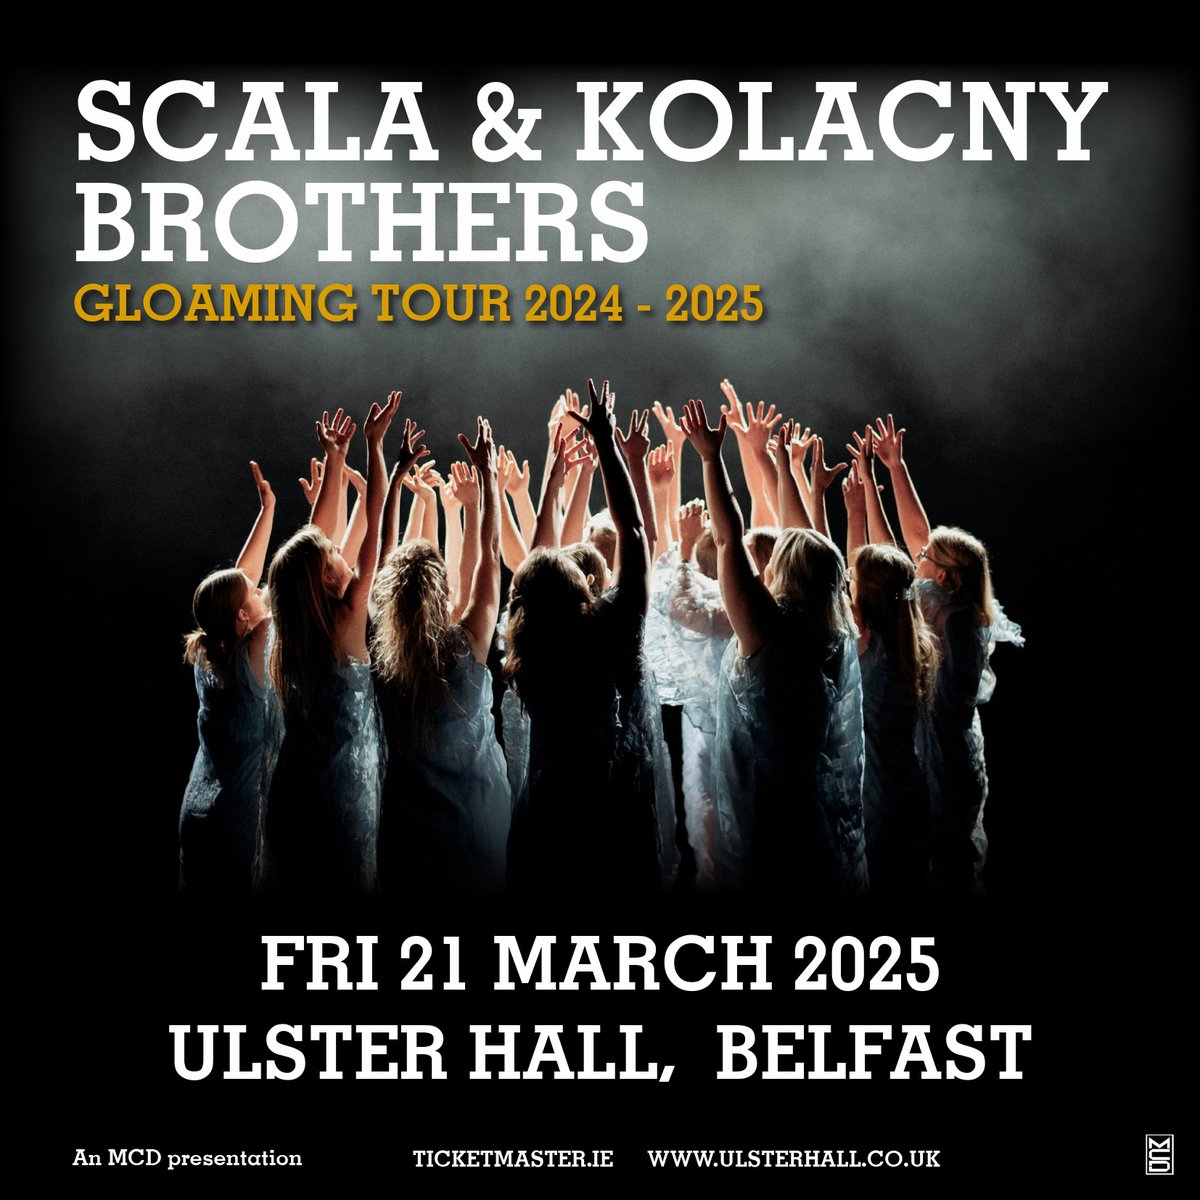 ✨ The incredible @Scala_Kolacny have announced a date at the iconic Ulster Hall in Belfast on Friday 21st March 2025 🎶 🎟️ Tickets on sale Friday at 10am from ulsterhall.co.uk / ticketmaster.ie